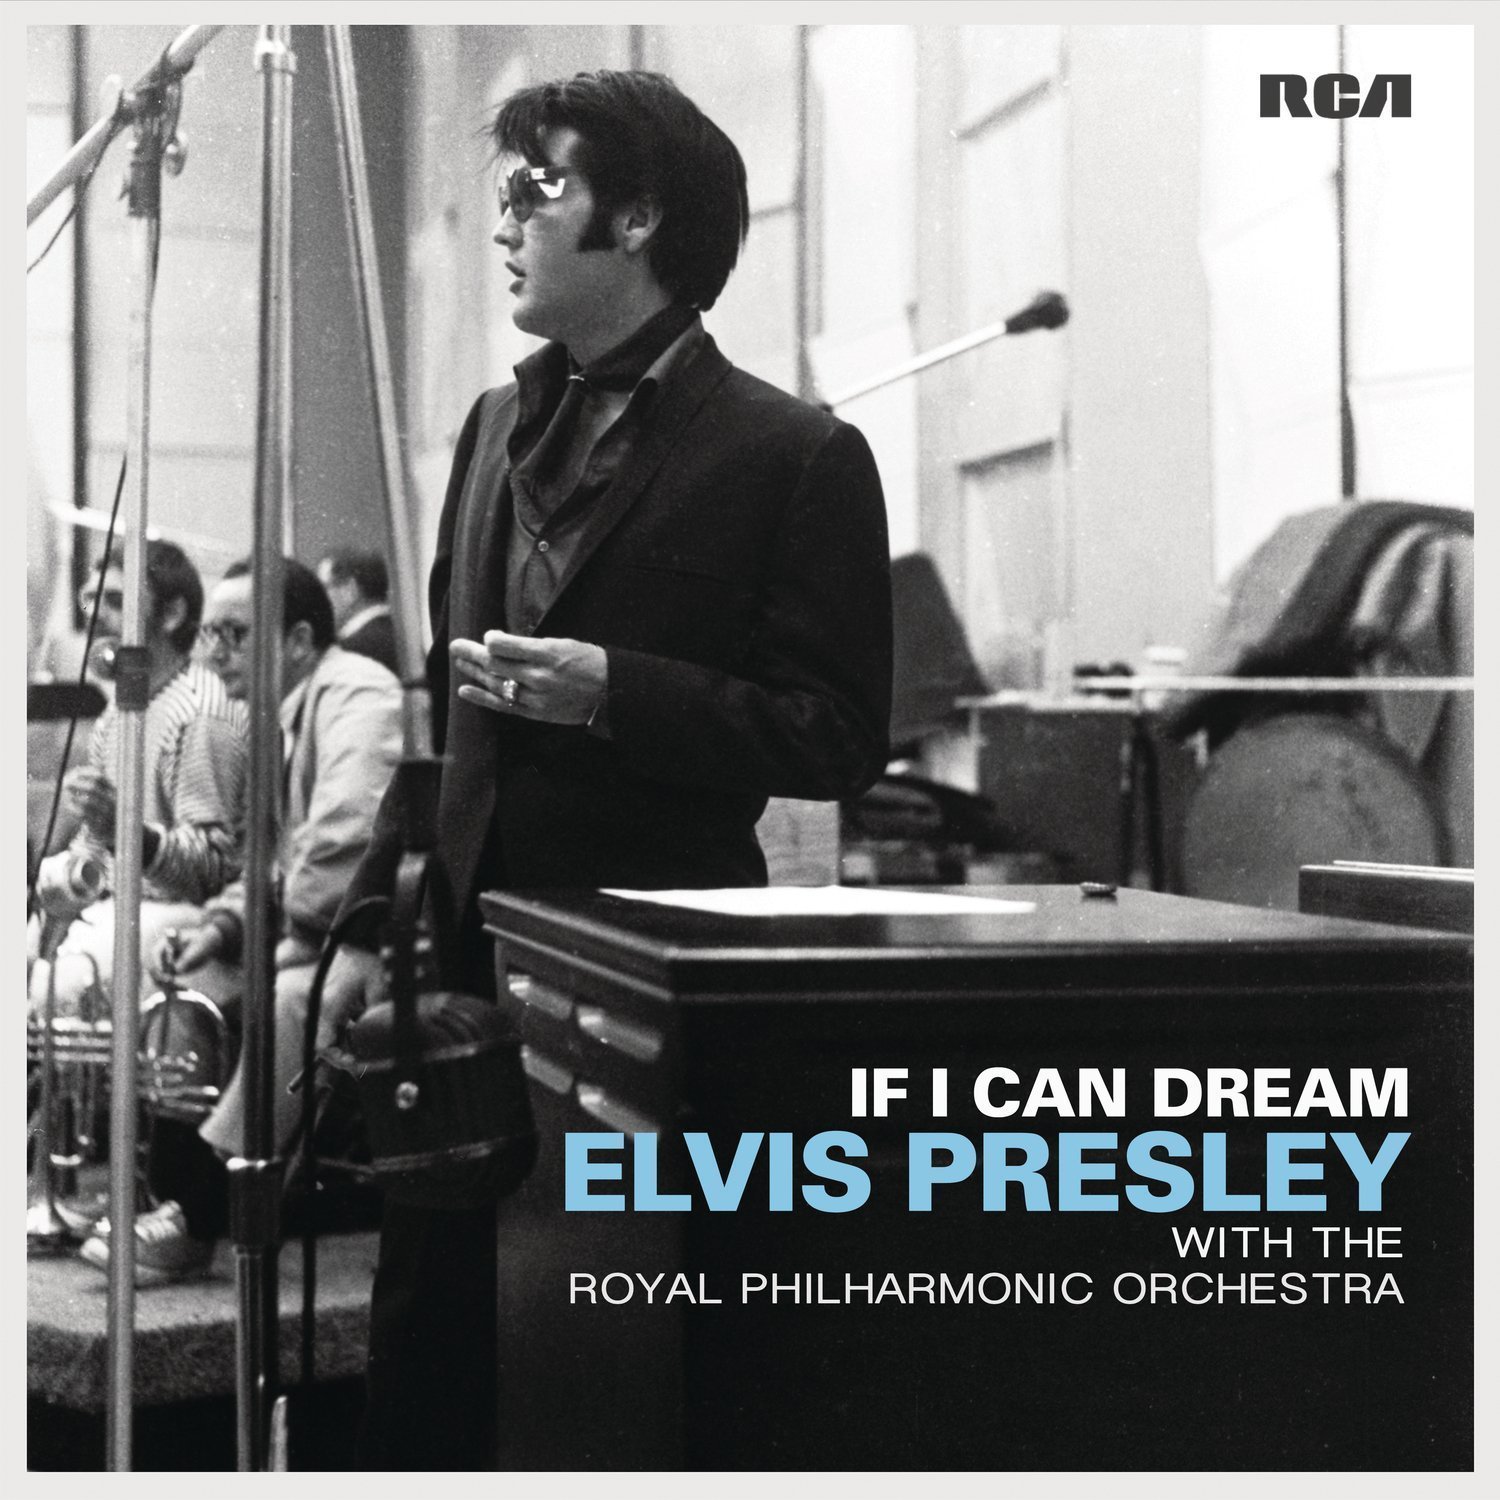 Vinyl Record Elvis Presley If I Can Dream: Elvis Presley With the Royal Philharmonic Orchestra (2 LP)